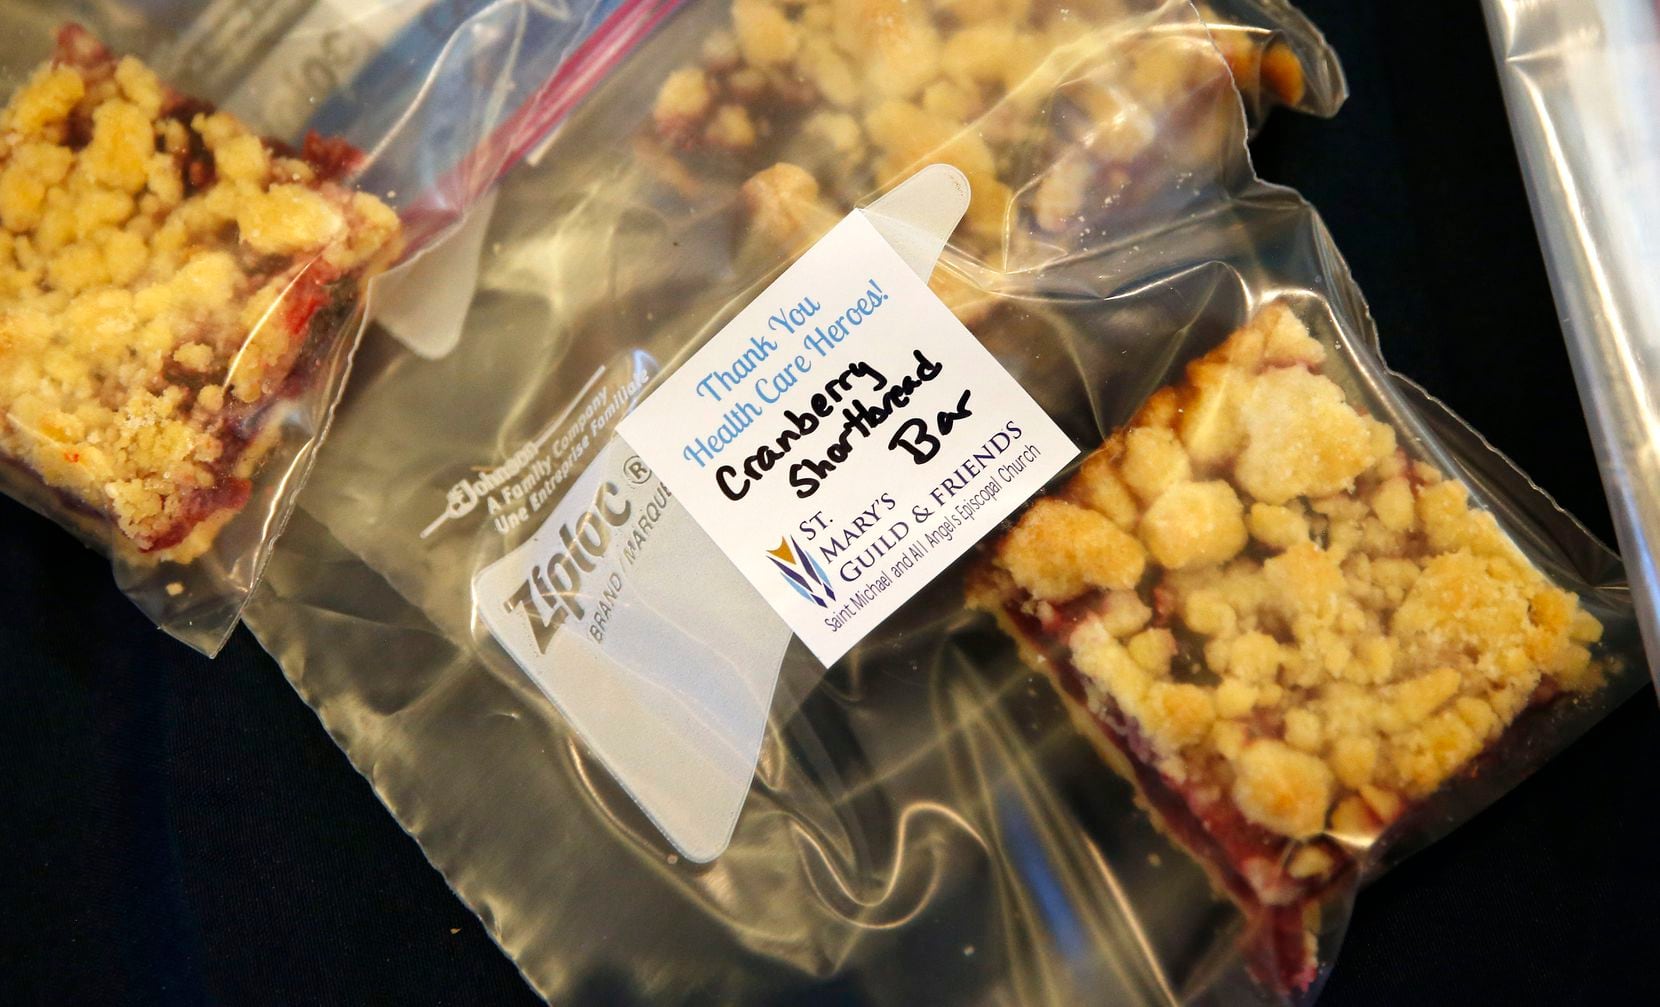 These cranberry shortbread bars were just one of the dozens of baked goods that sorted into 21 bags of treats that went to Baylor University Medical Center Monday thanks to the baking prowess of St. Mary's Guild.